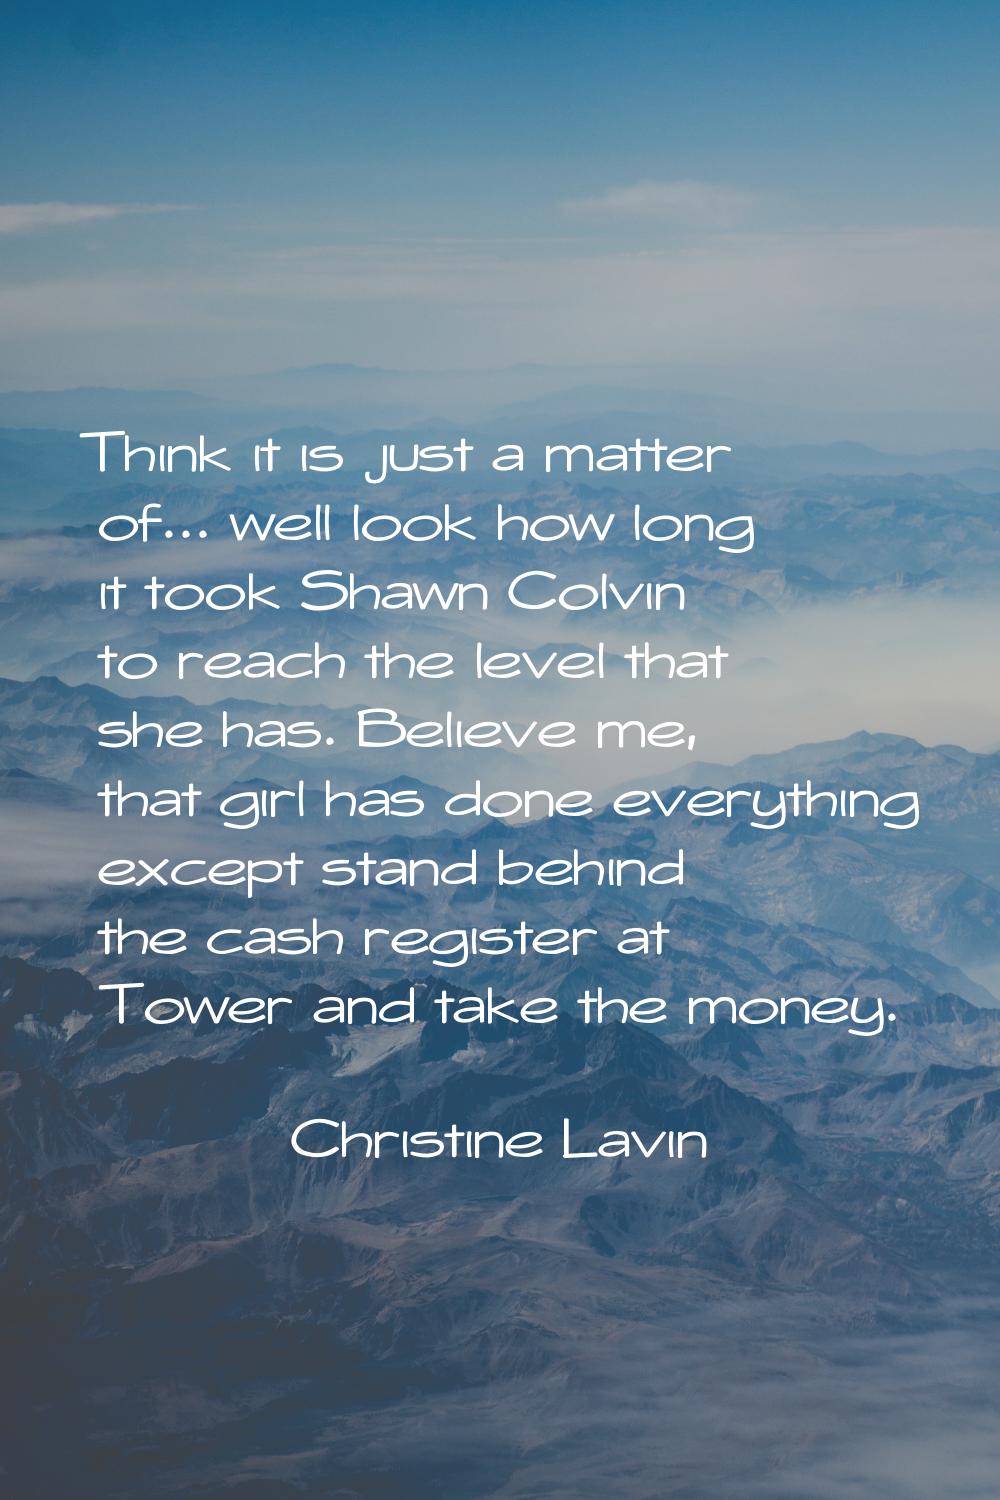 Think it is just a matter of... well look how long it took Shawn Colvin to reach the level that she